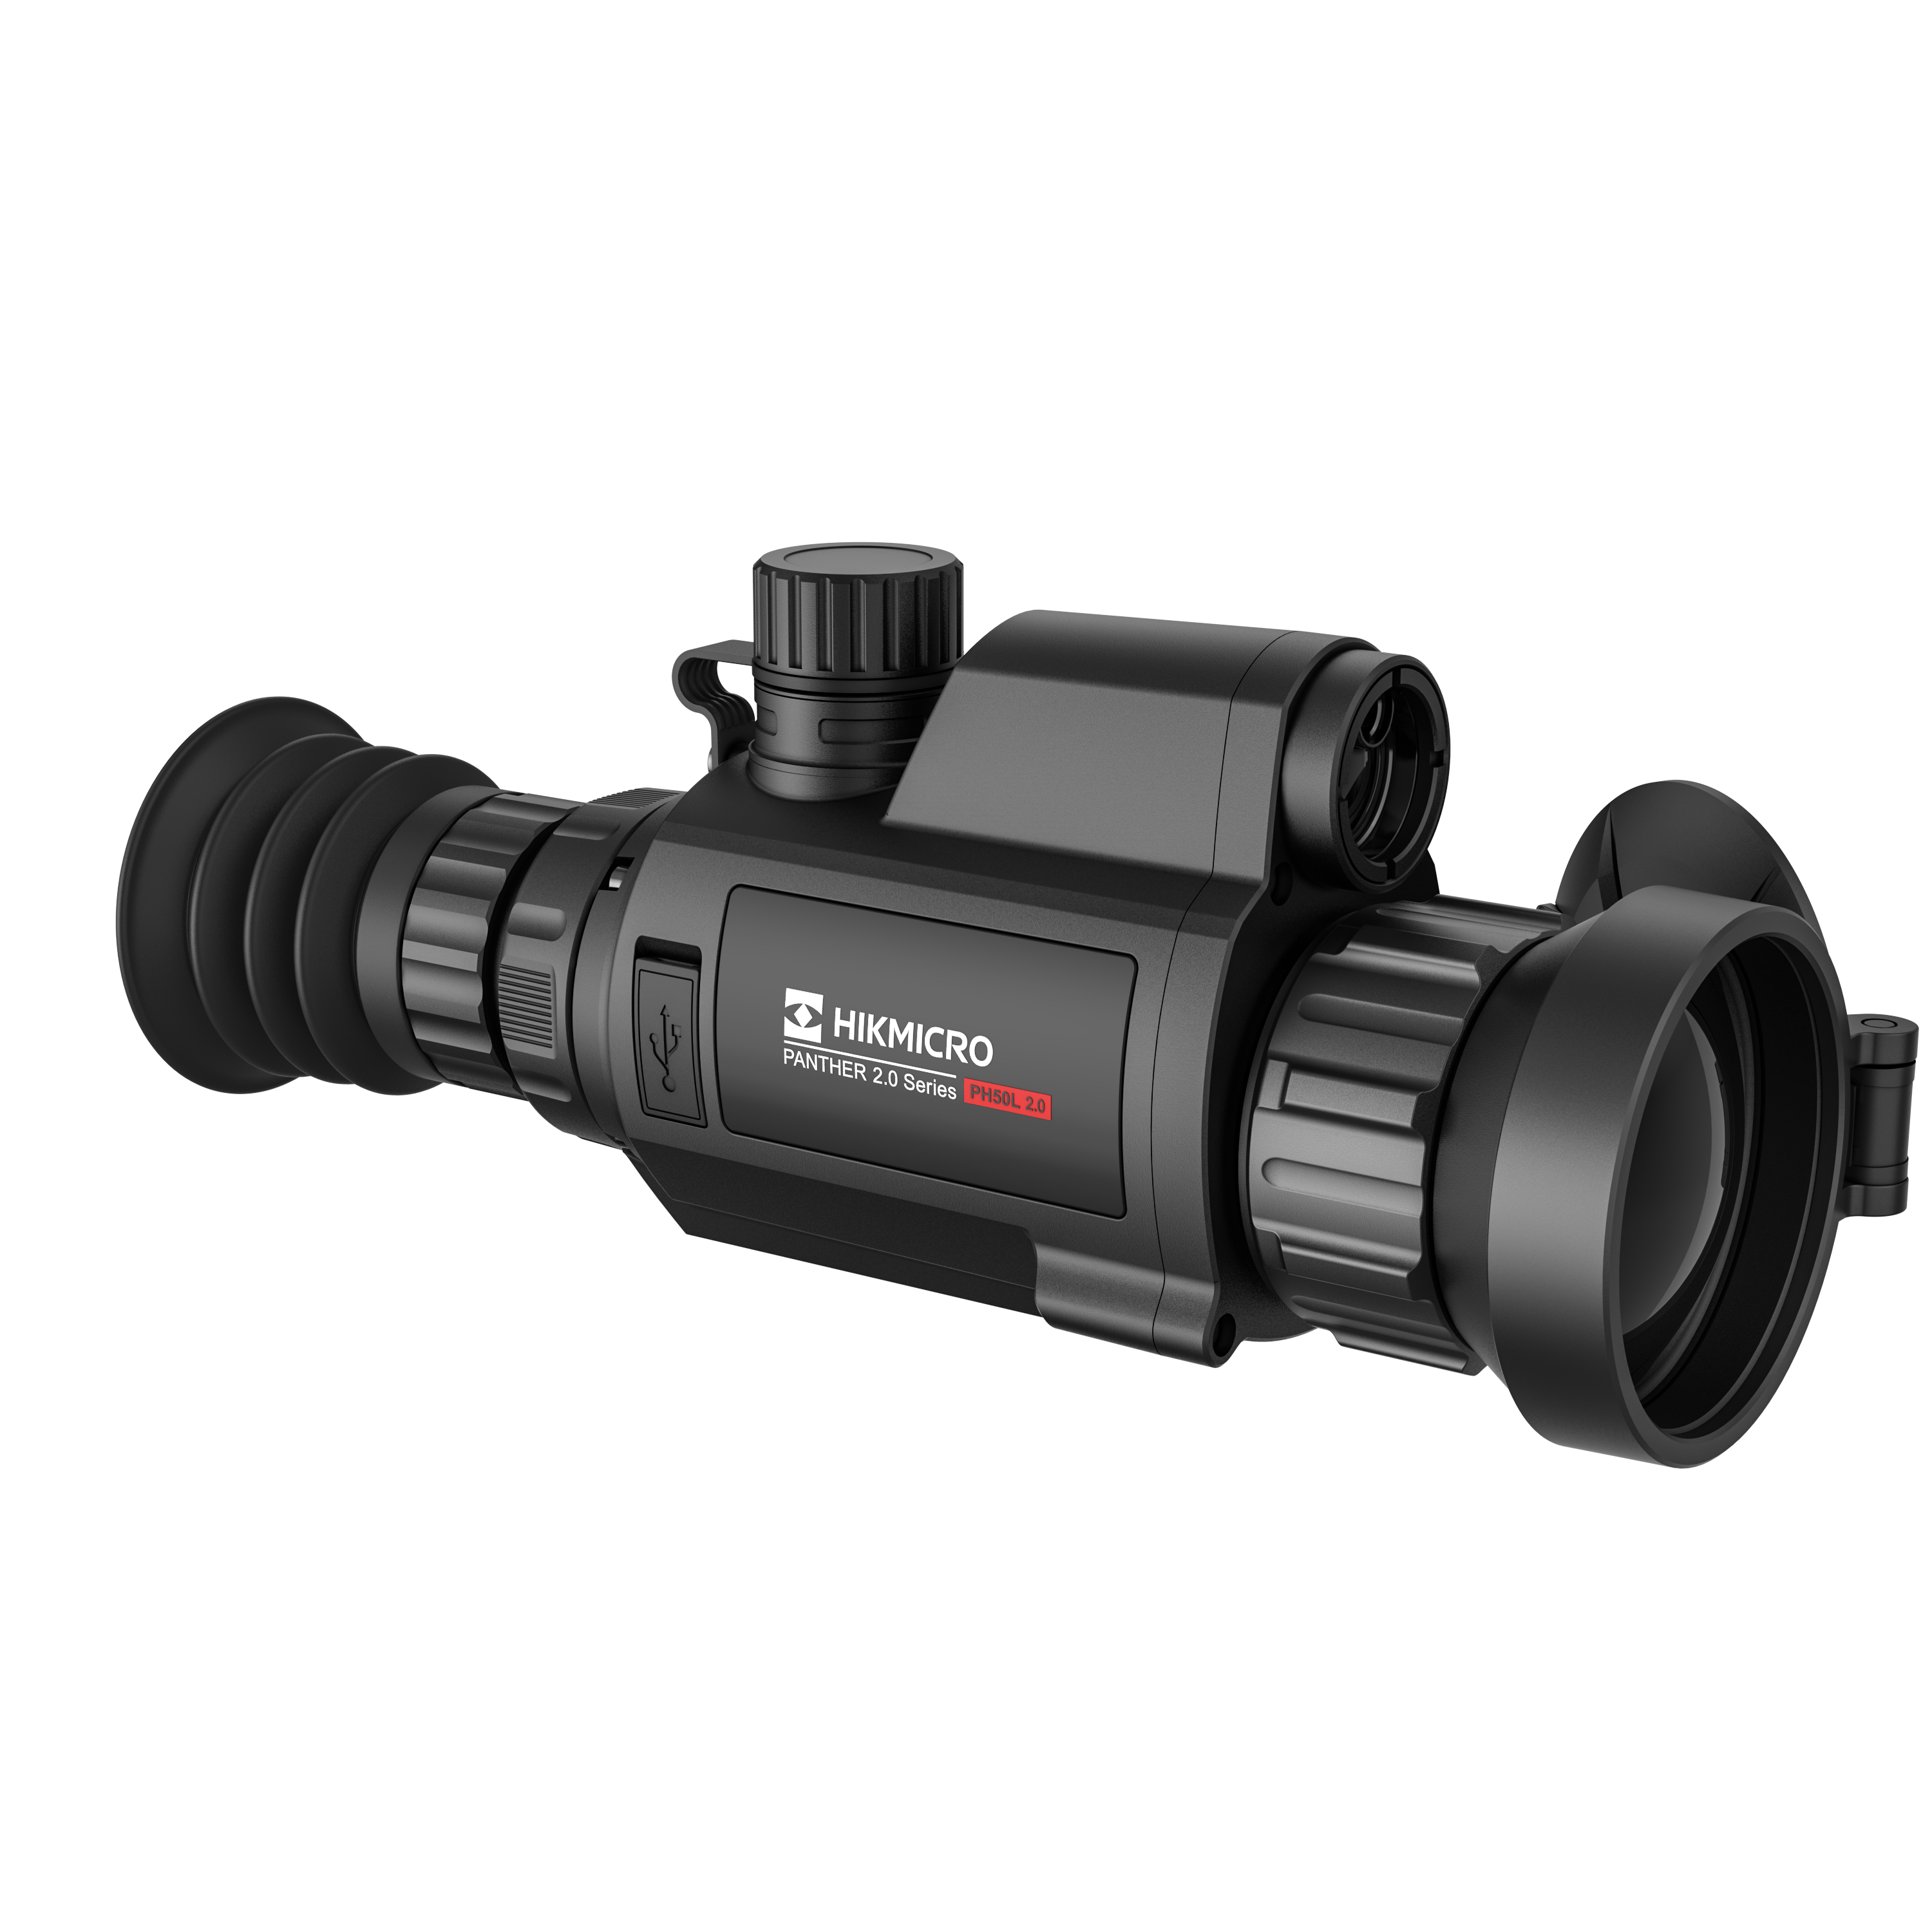 HIKMICRO Panther PH50L 2.0 Thermal Scope - 50mm